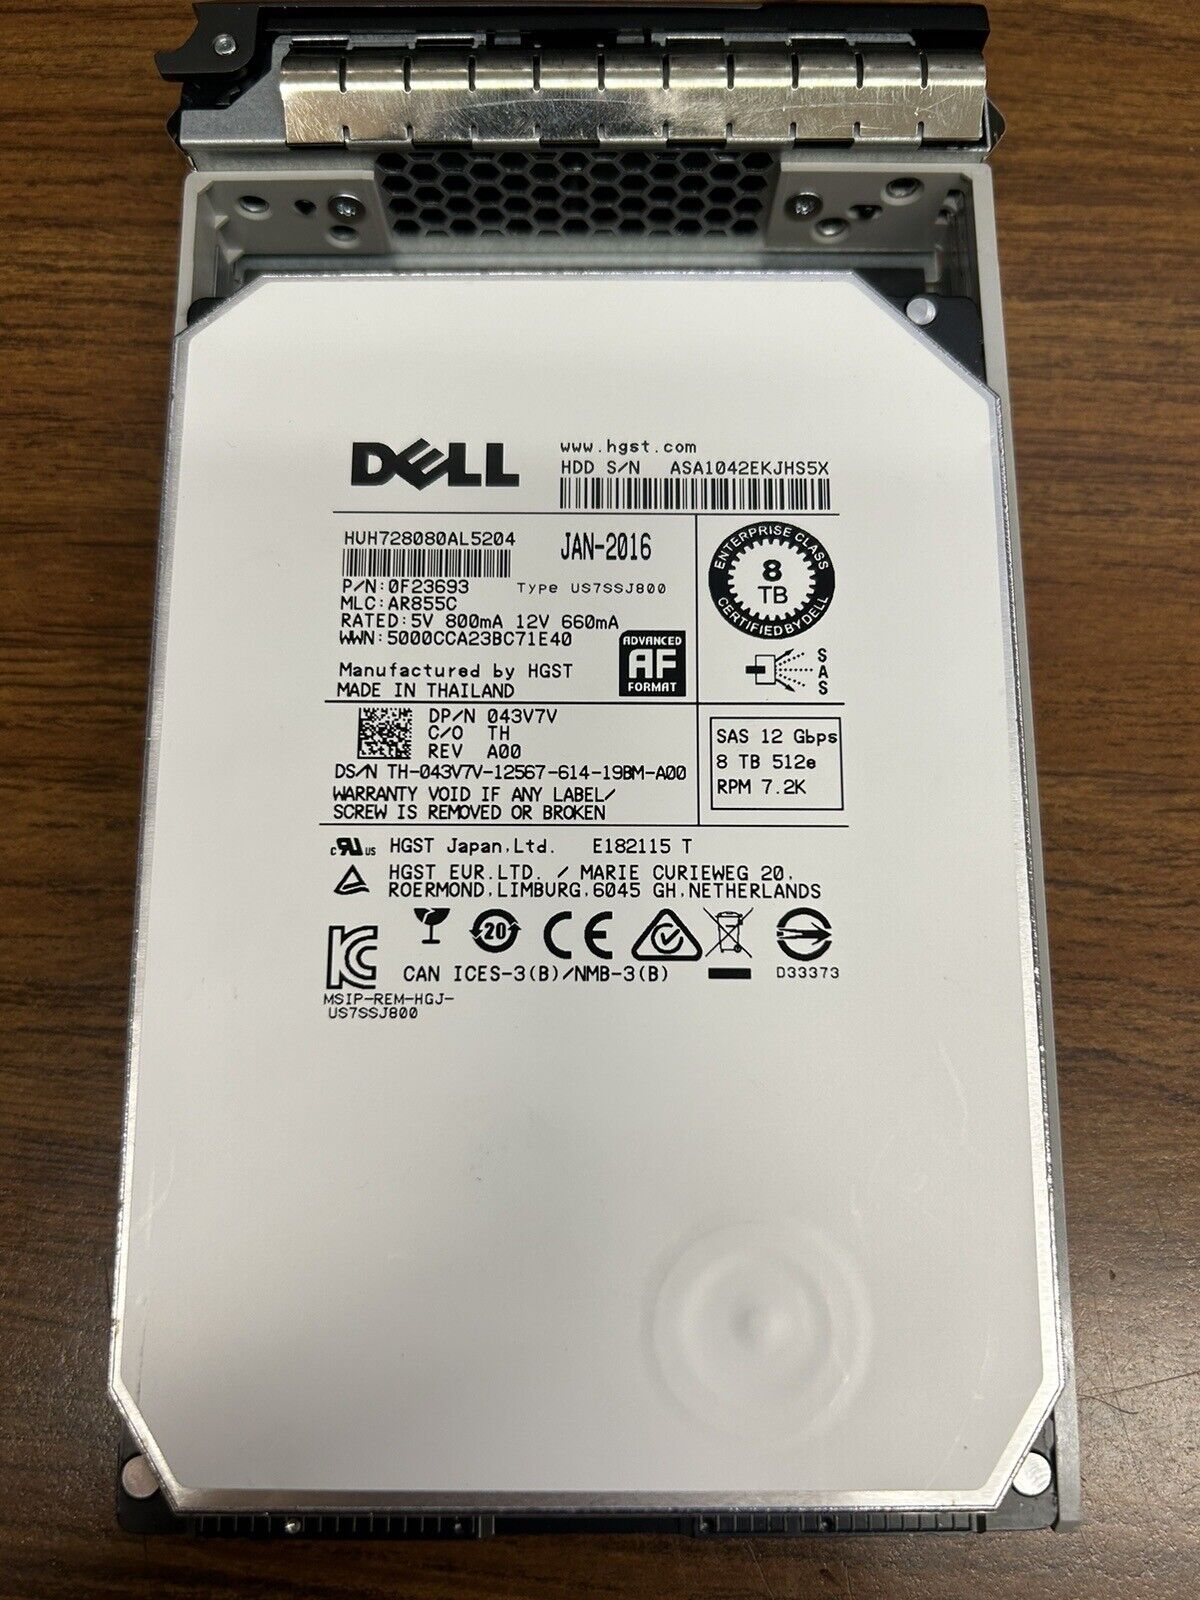 43V7V Dell 8TB 7.2K 12Gb/s SAS 3.5in Hard Drive HUH728080AL5204 - LOW HOURS